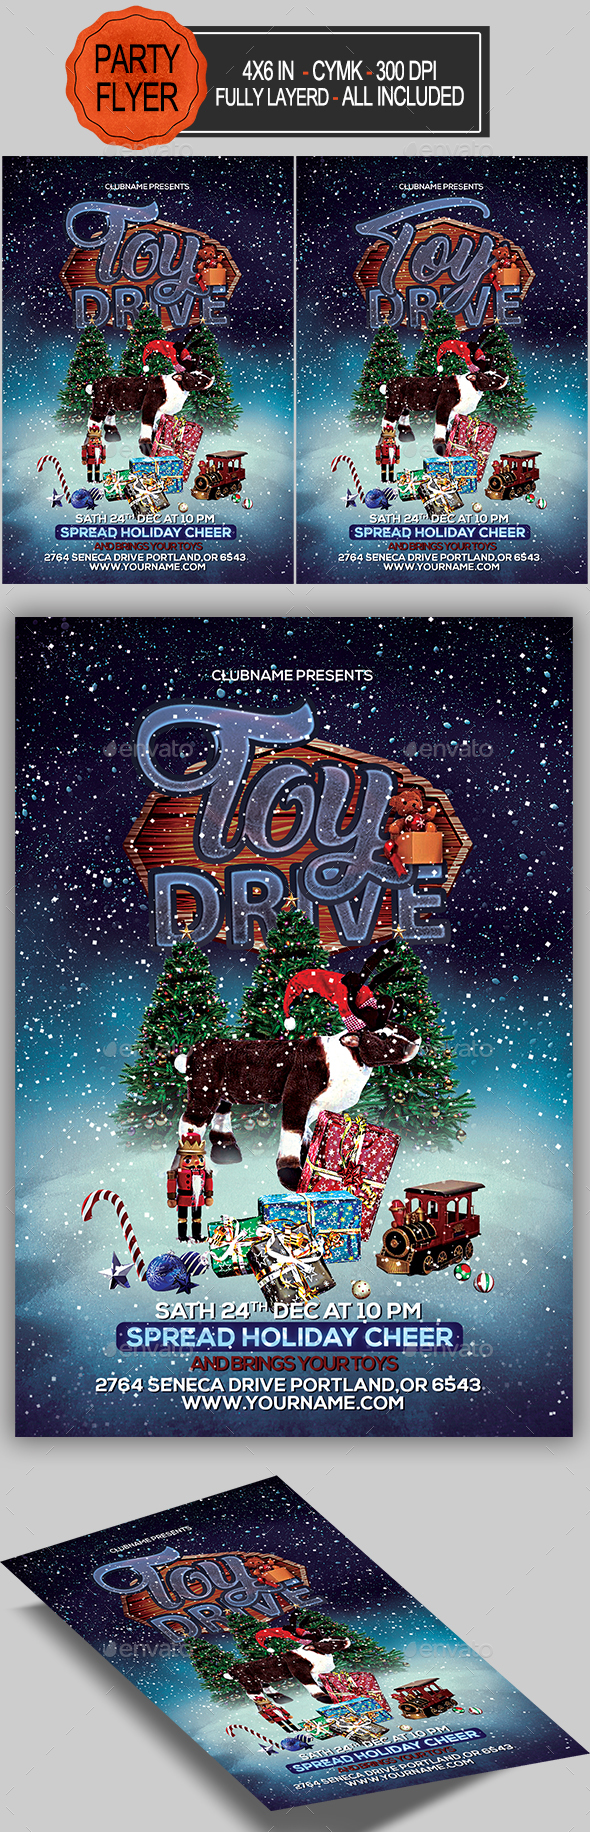 GraphicRiver Toy Drive Flyer 20899678